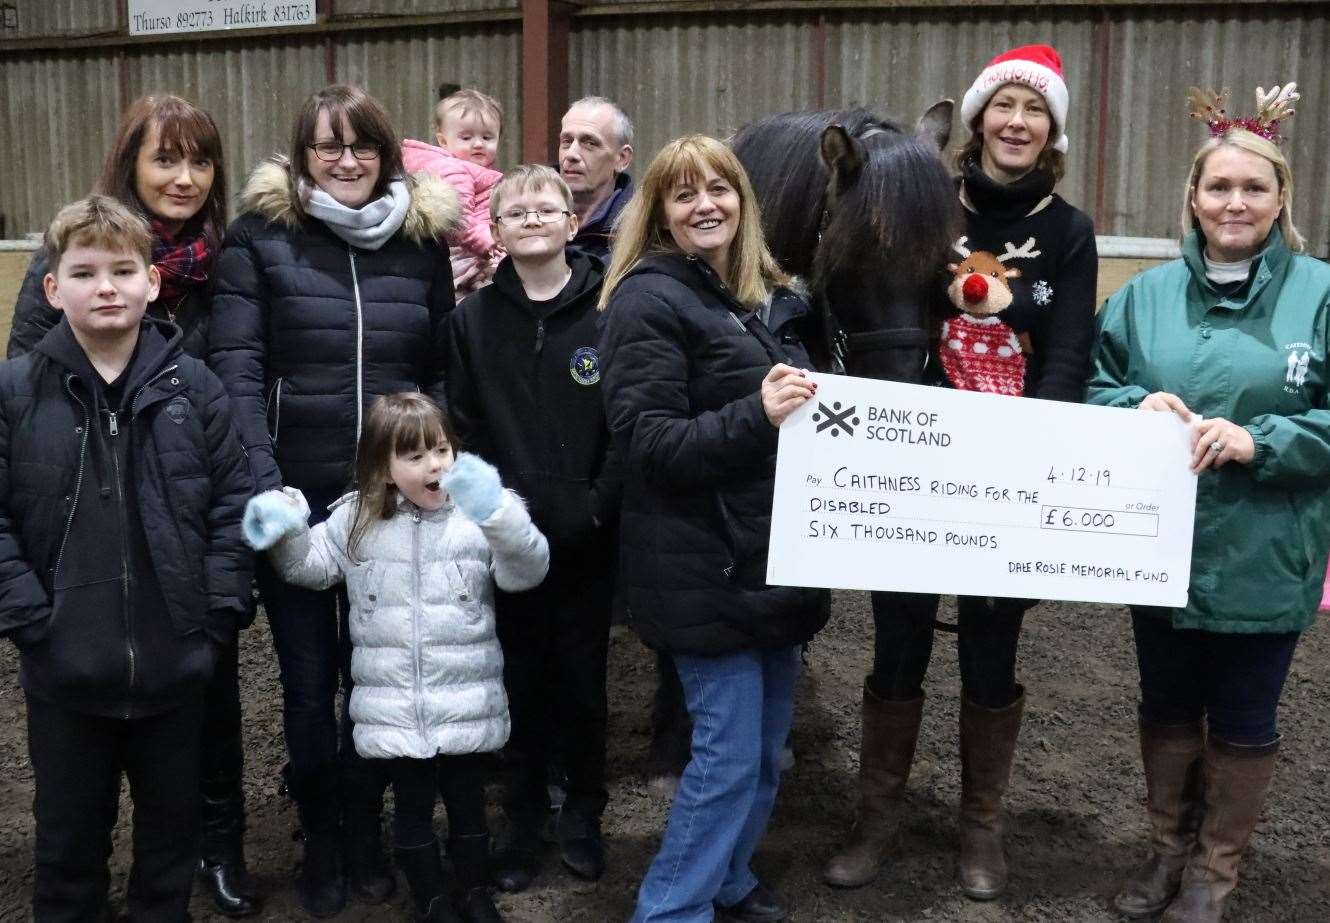 Claire Fraser (back left) along with members of her family handing over a cheque for £6000 to the Caithness RDA group chairperson Judith Miller (right) last December.